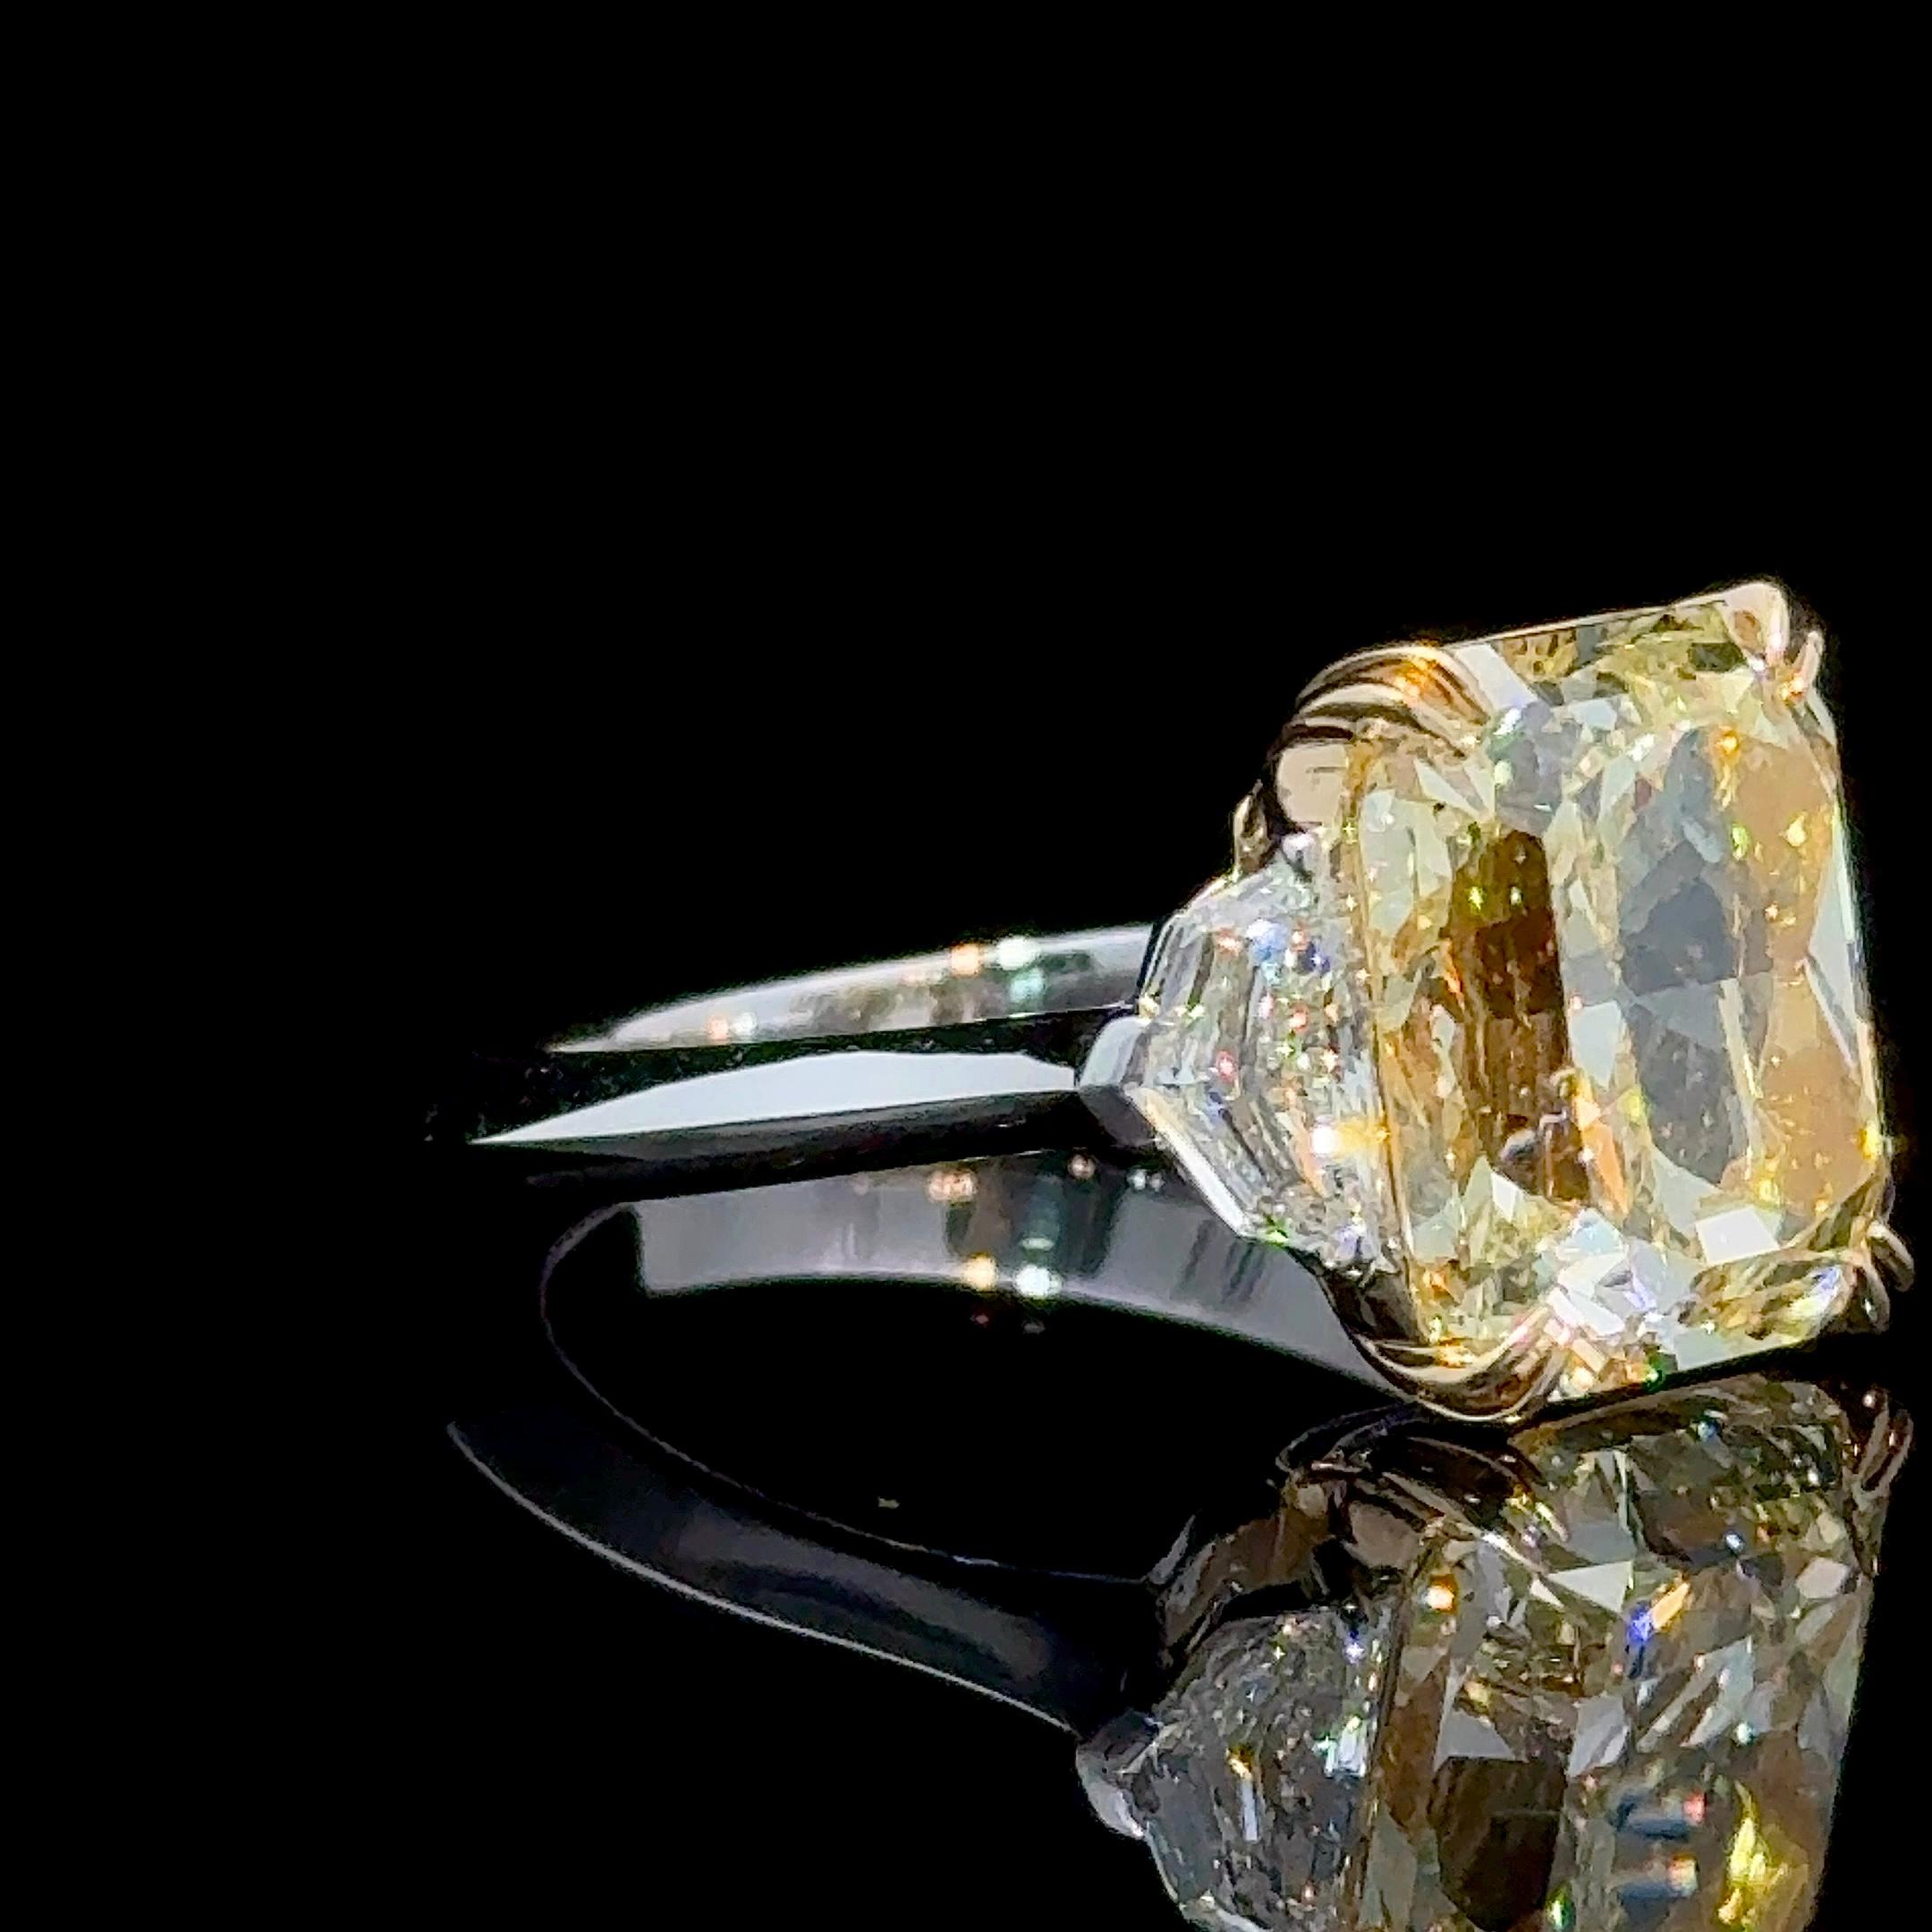 GIA Certified 7.01 Carat Rectangular Radiant Cut Yellow Diamond Three Stone Ring
Set in a our signature Three Stone Ring with twin 